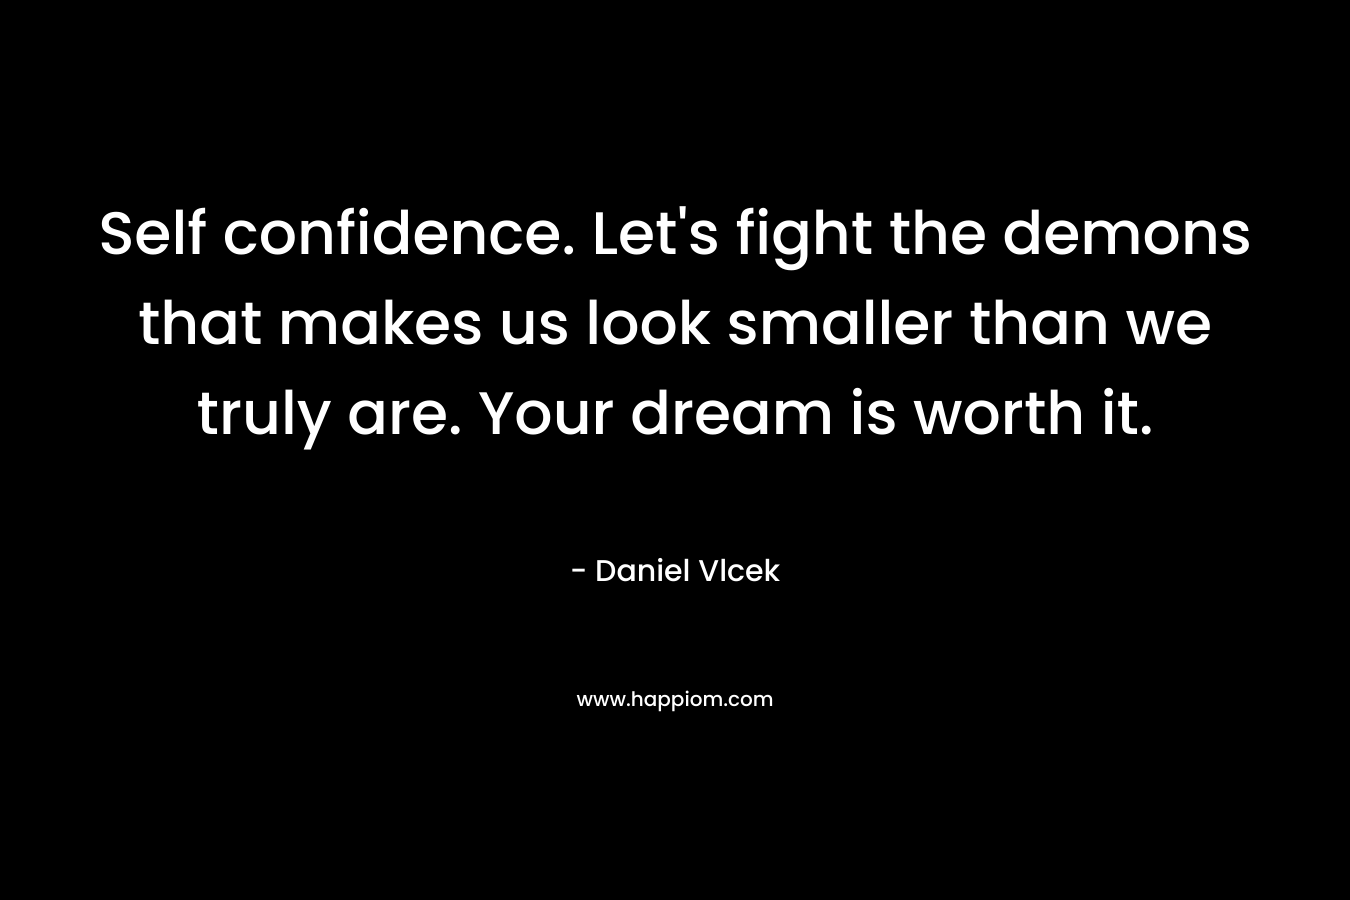 Self confidence. Let’s fight the demons that makes us look smaller than we truly are. Your dream is worth it. – Daniel Vlcek